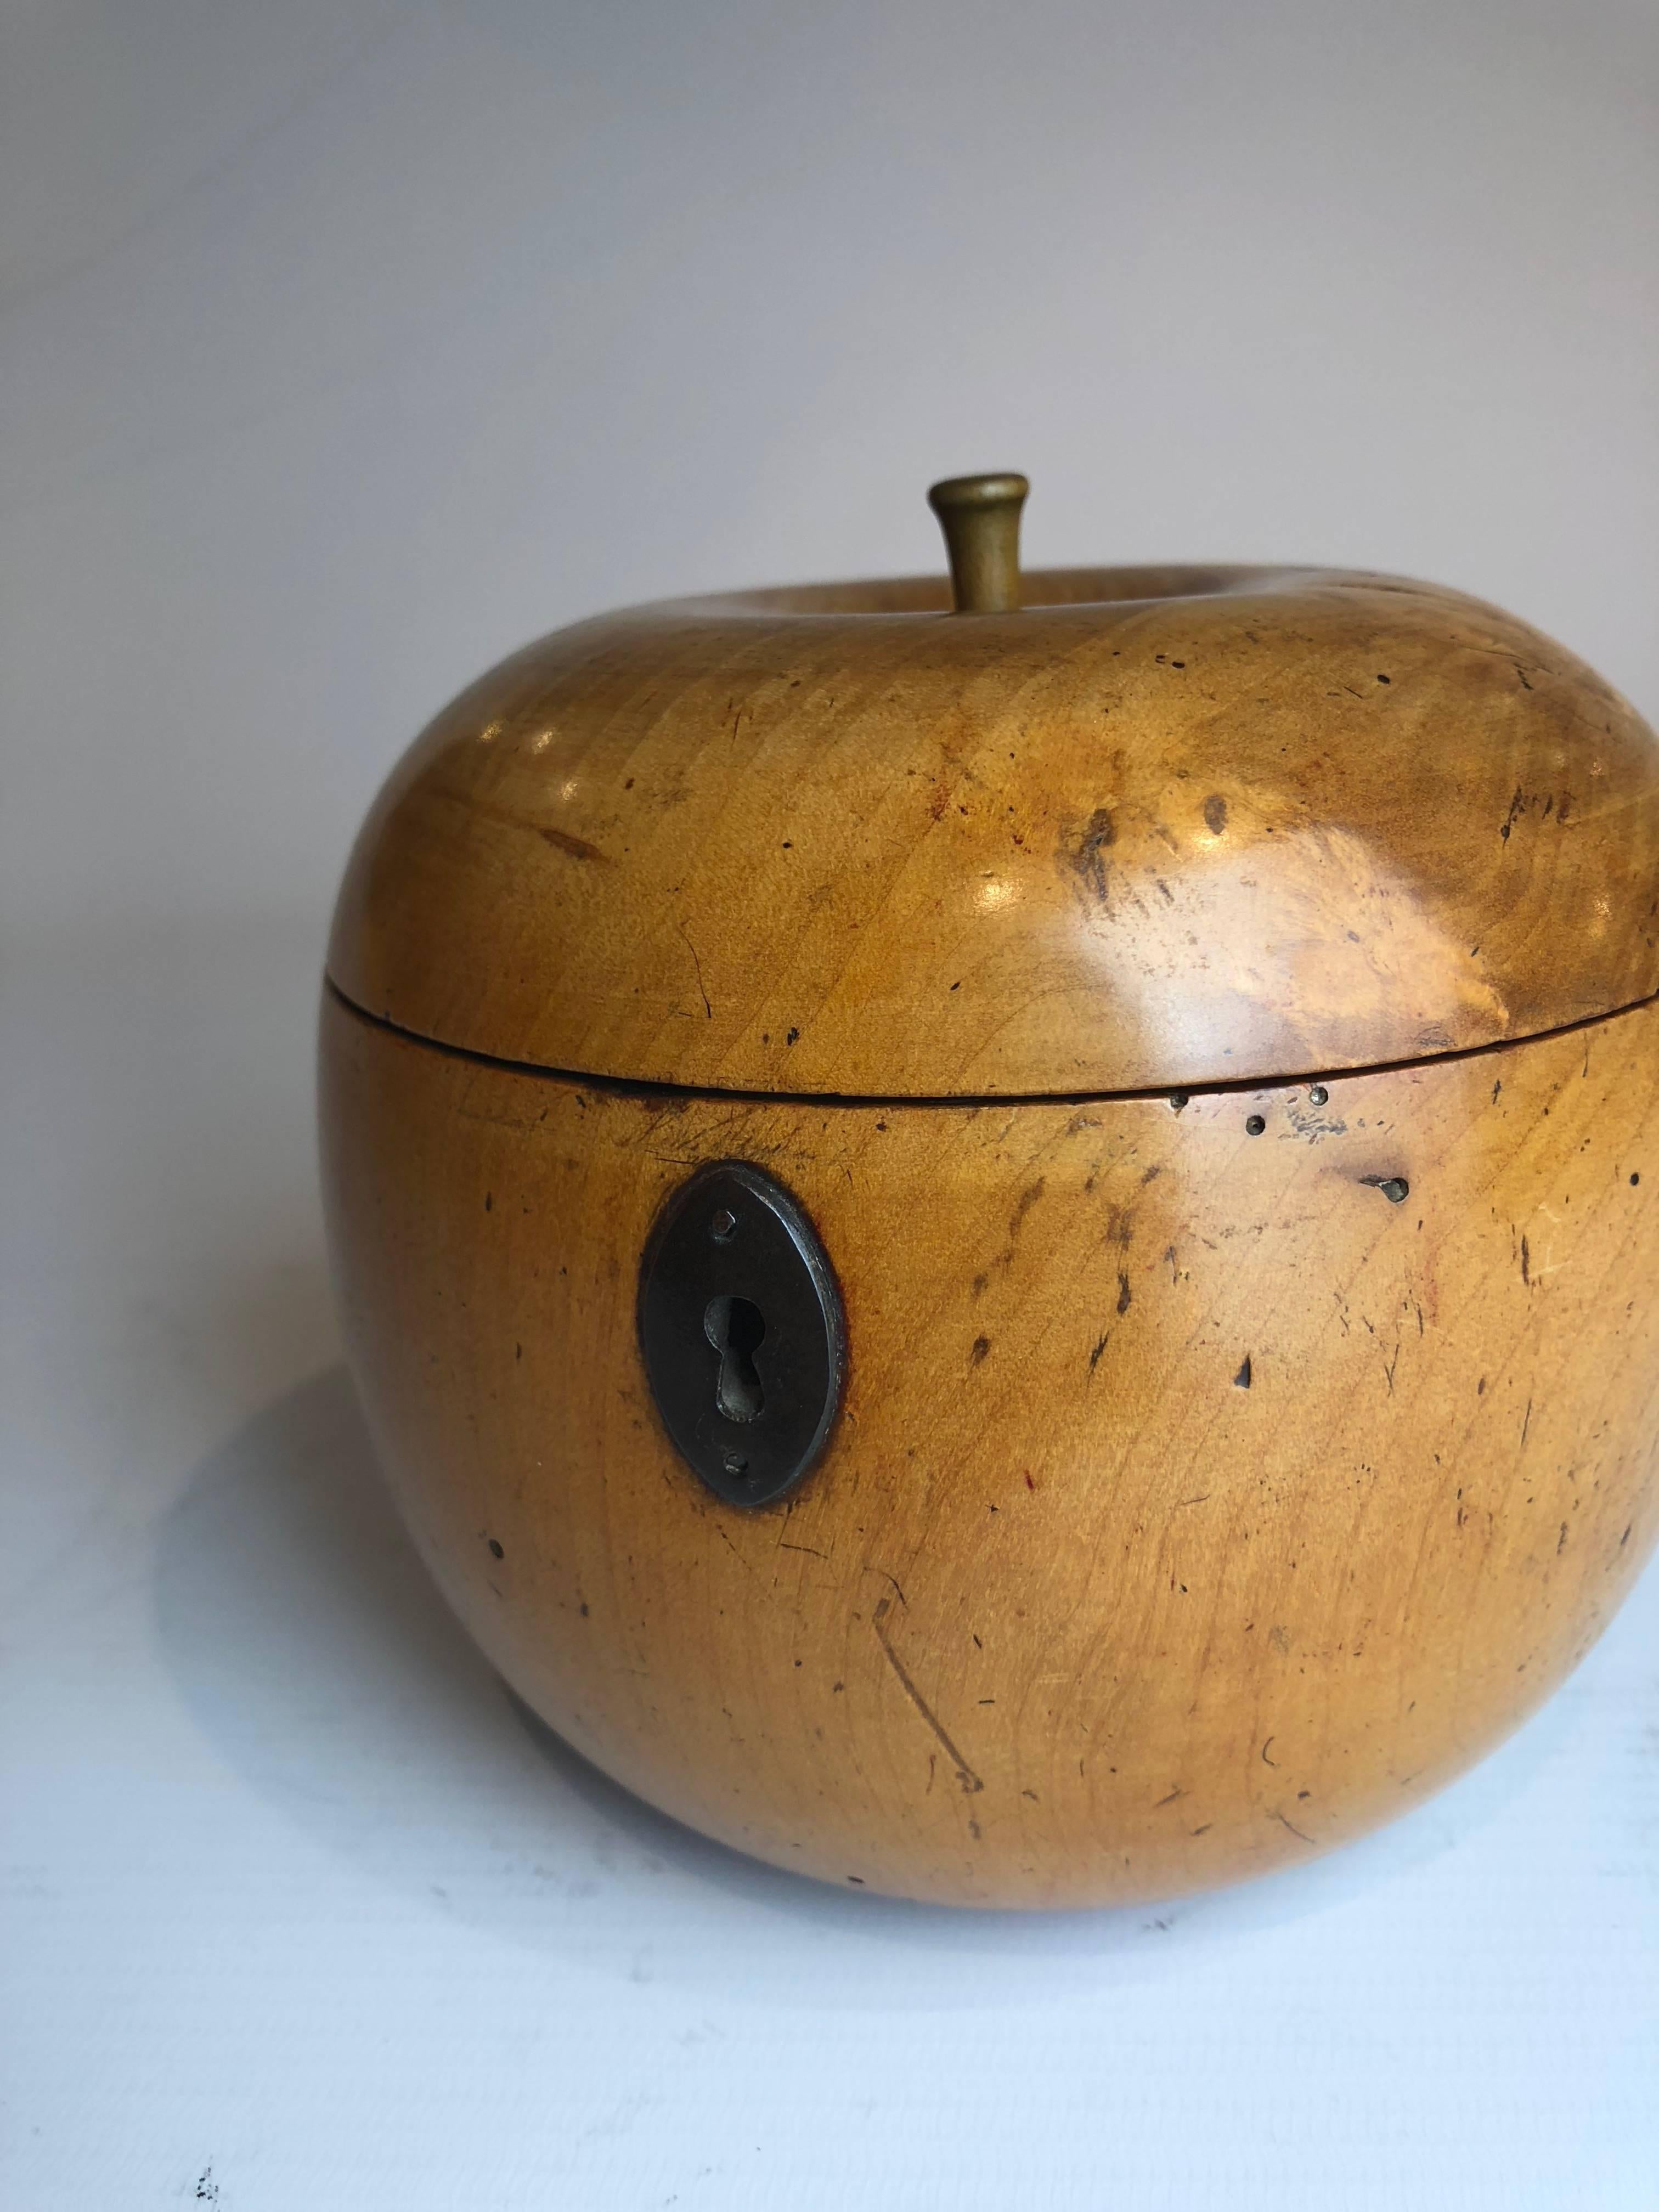 An excellent example of a late 18th century apple shaped fruitwood tea caddy.
Great colour and patination

This treen apple tea caddy still has traces of its original tin foil lining